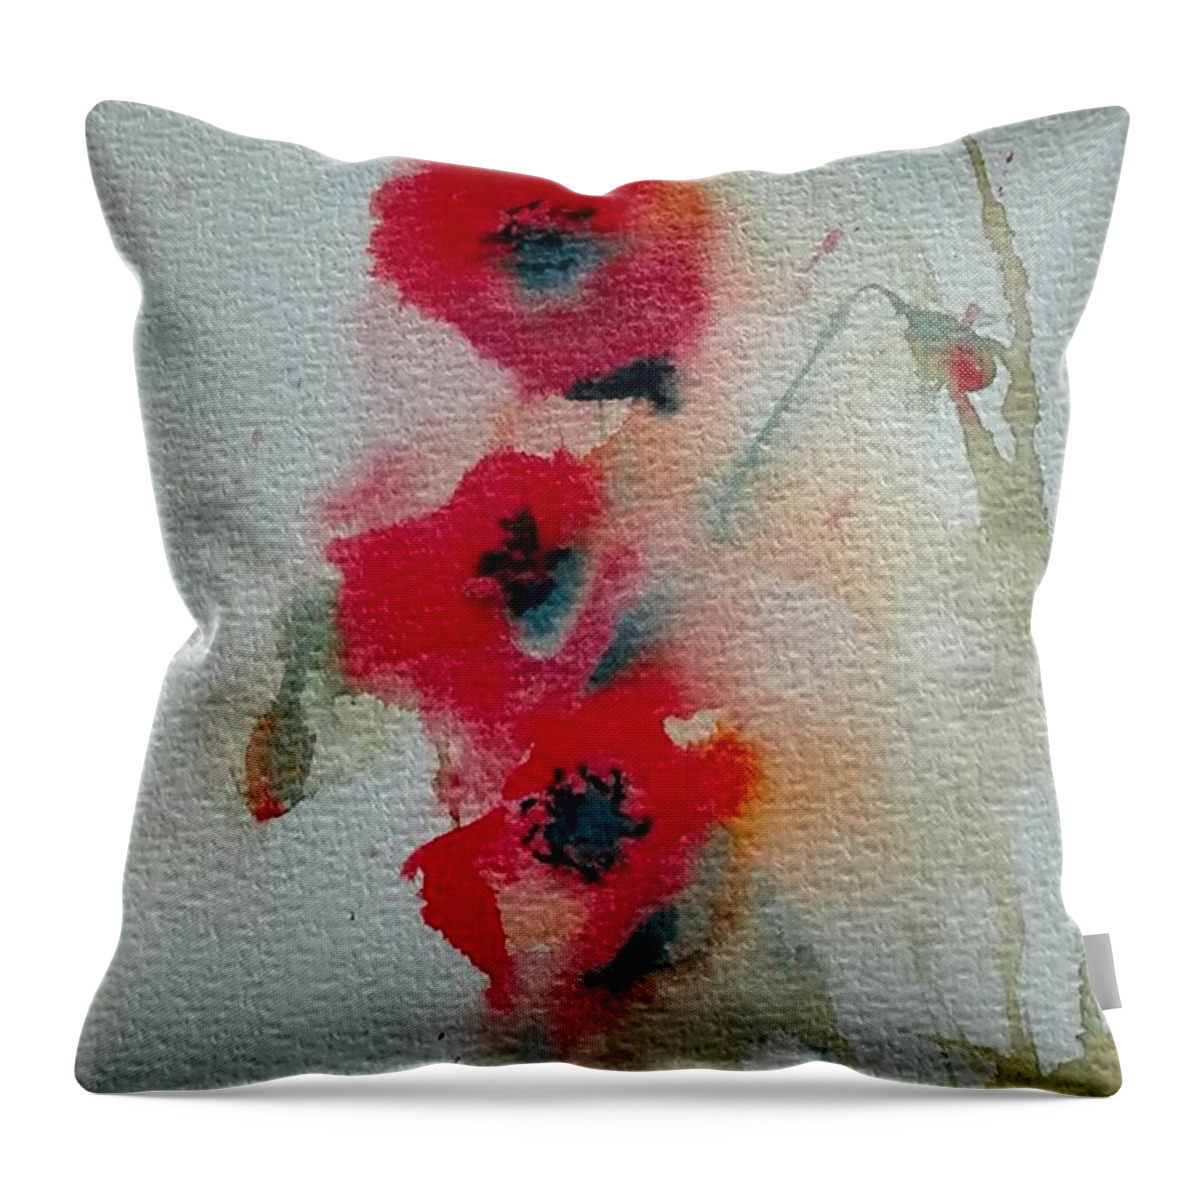 Poppies Throw Pillow featuring the painting Poppies by Sandie Croft